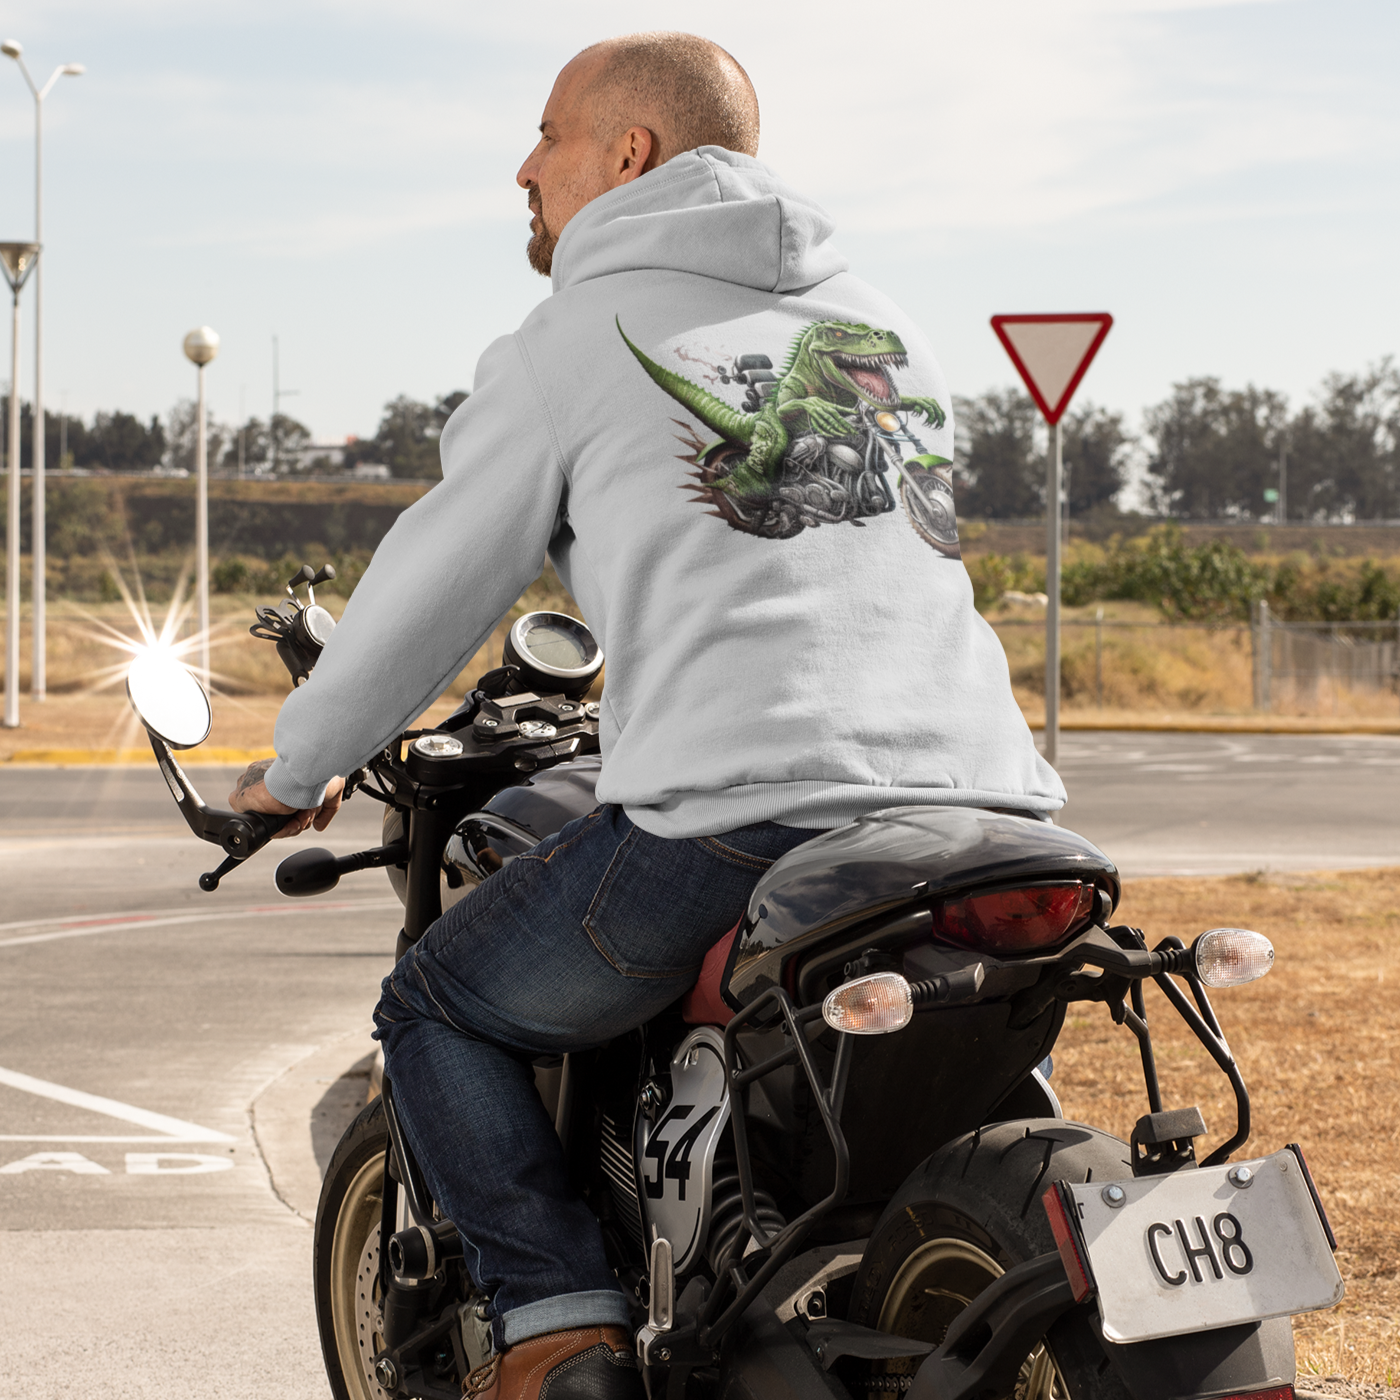 Dinosauria Collection 05 - Unisex Hoodie - Motorcycle Club Fun Hoodie - Gift for Dad